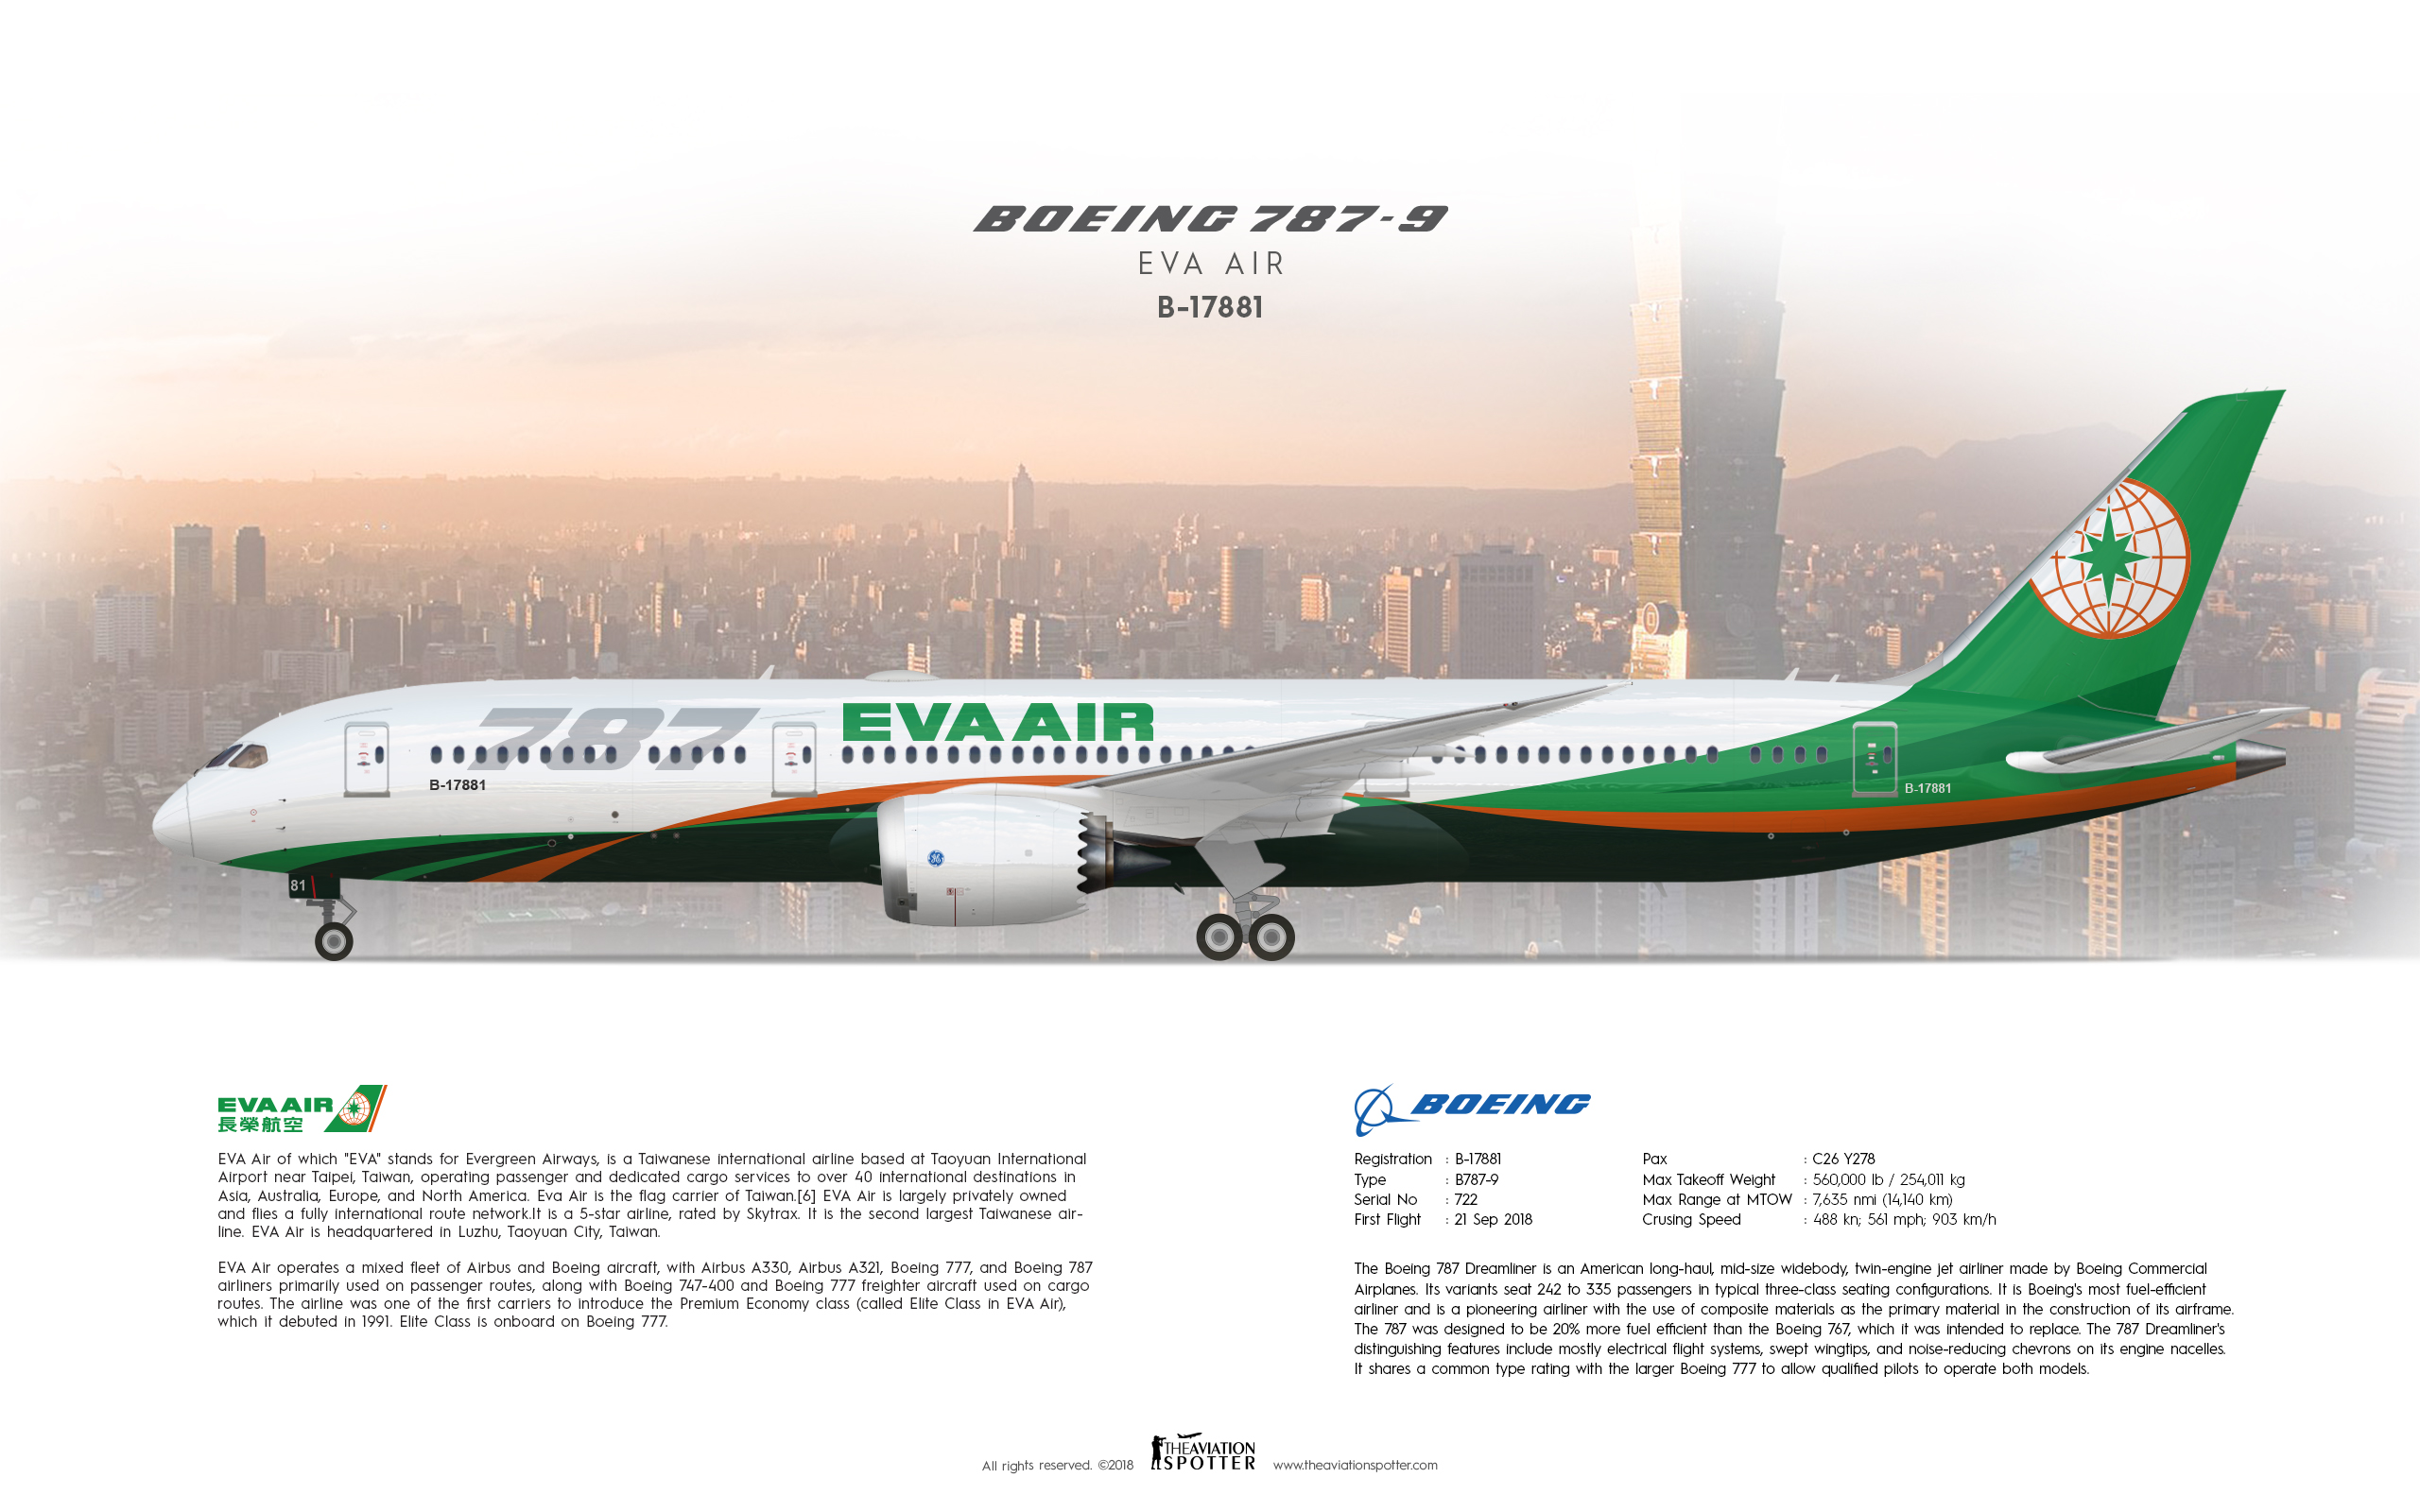 EVA Air Boeing 787 9 Dreamliner - Theaviationspotter's Painting Hangar -  Gallery - Airline Empires